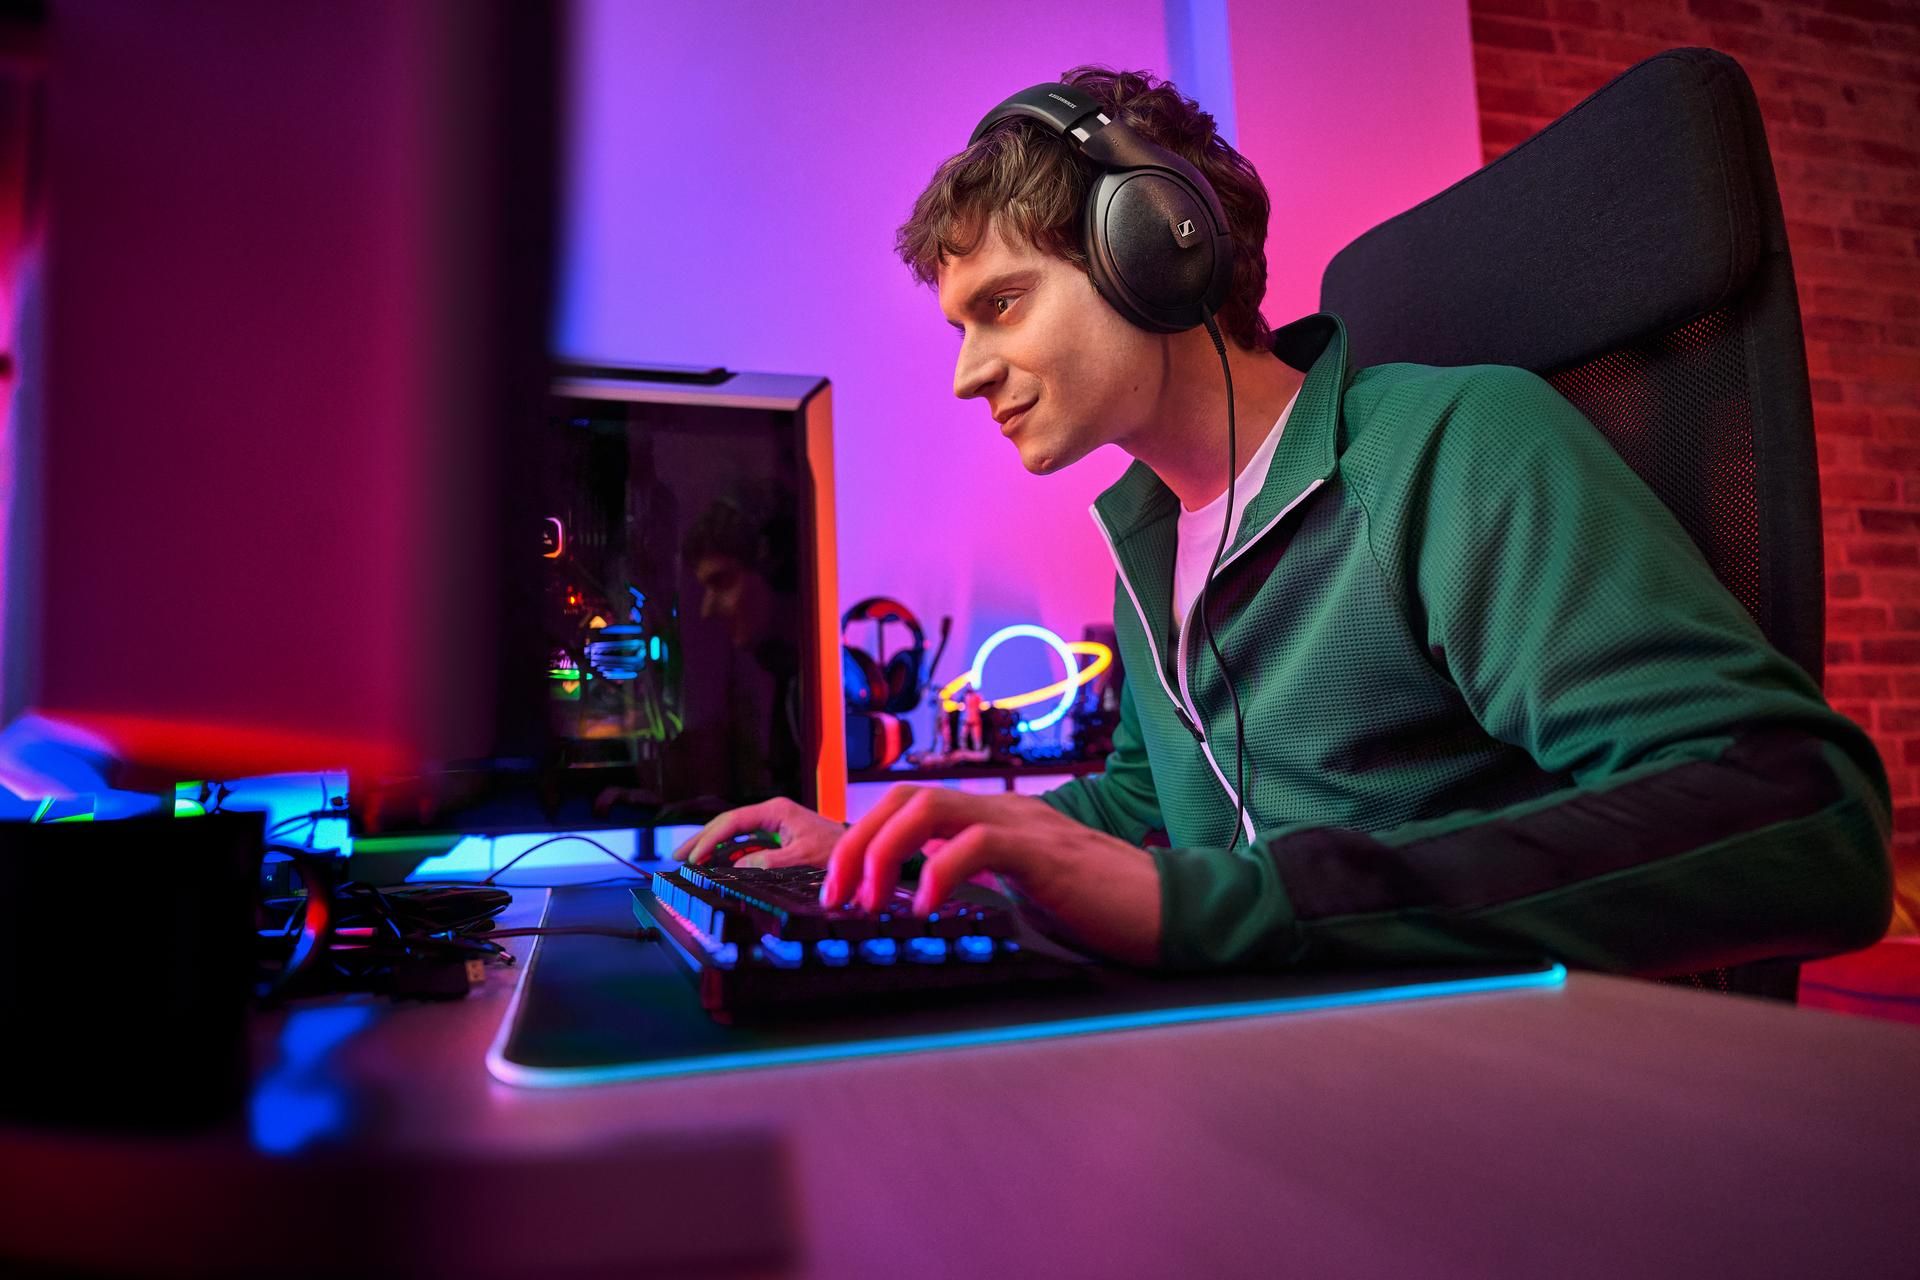 A person sitting at a desk gaming on a PC while wearing the Sennheiser HD 620S headphones.